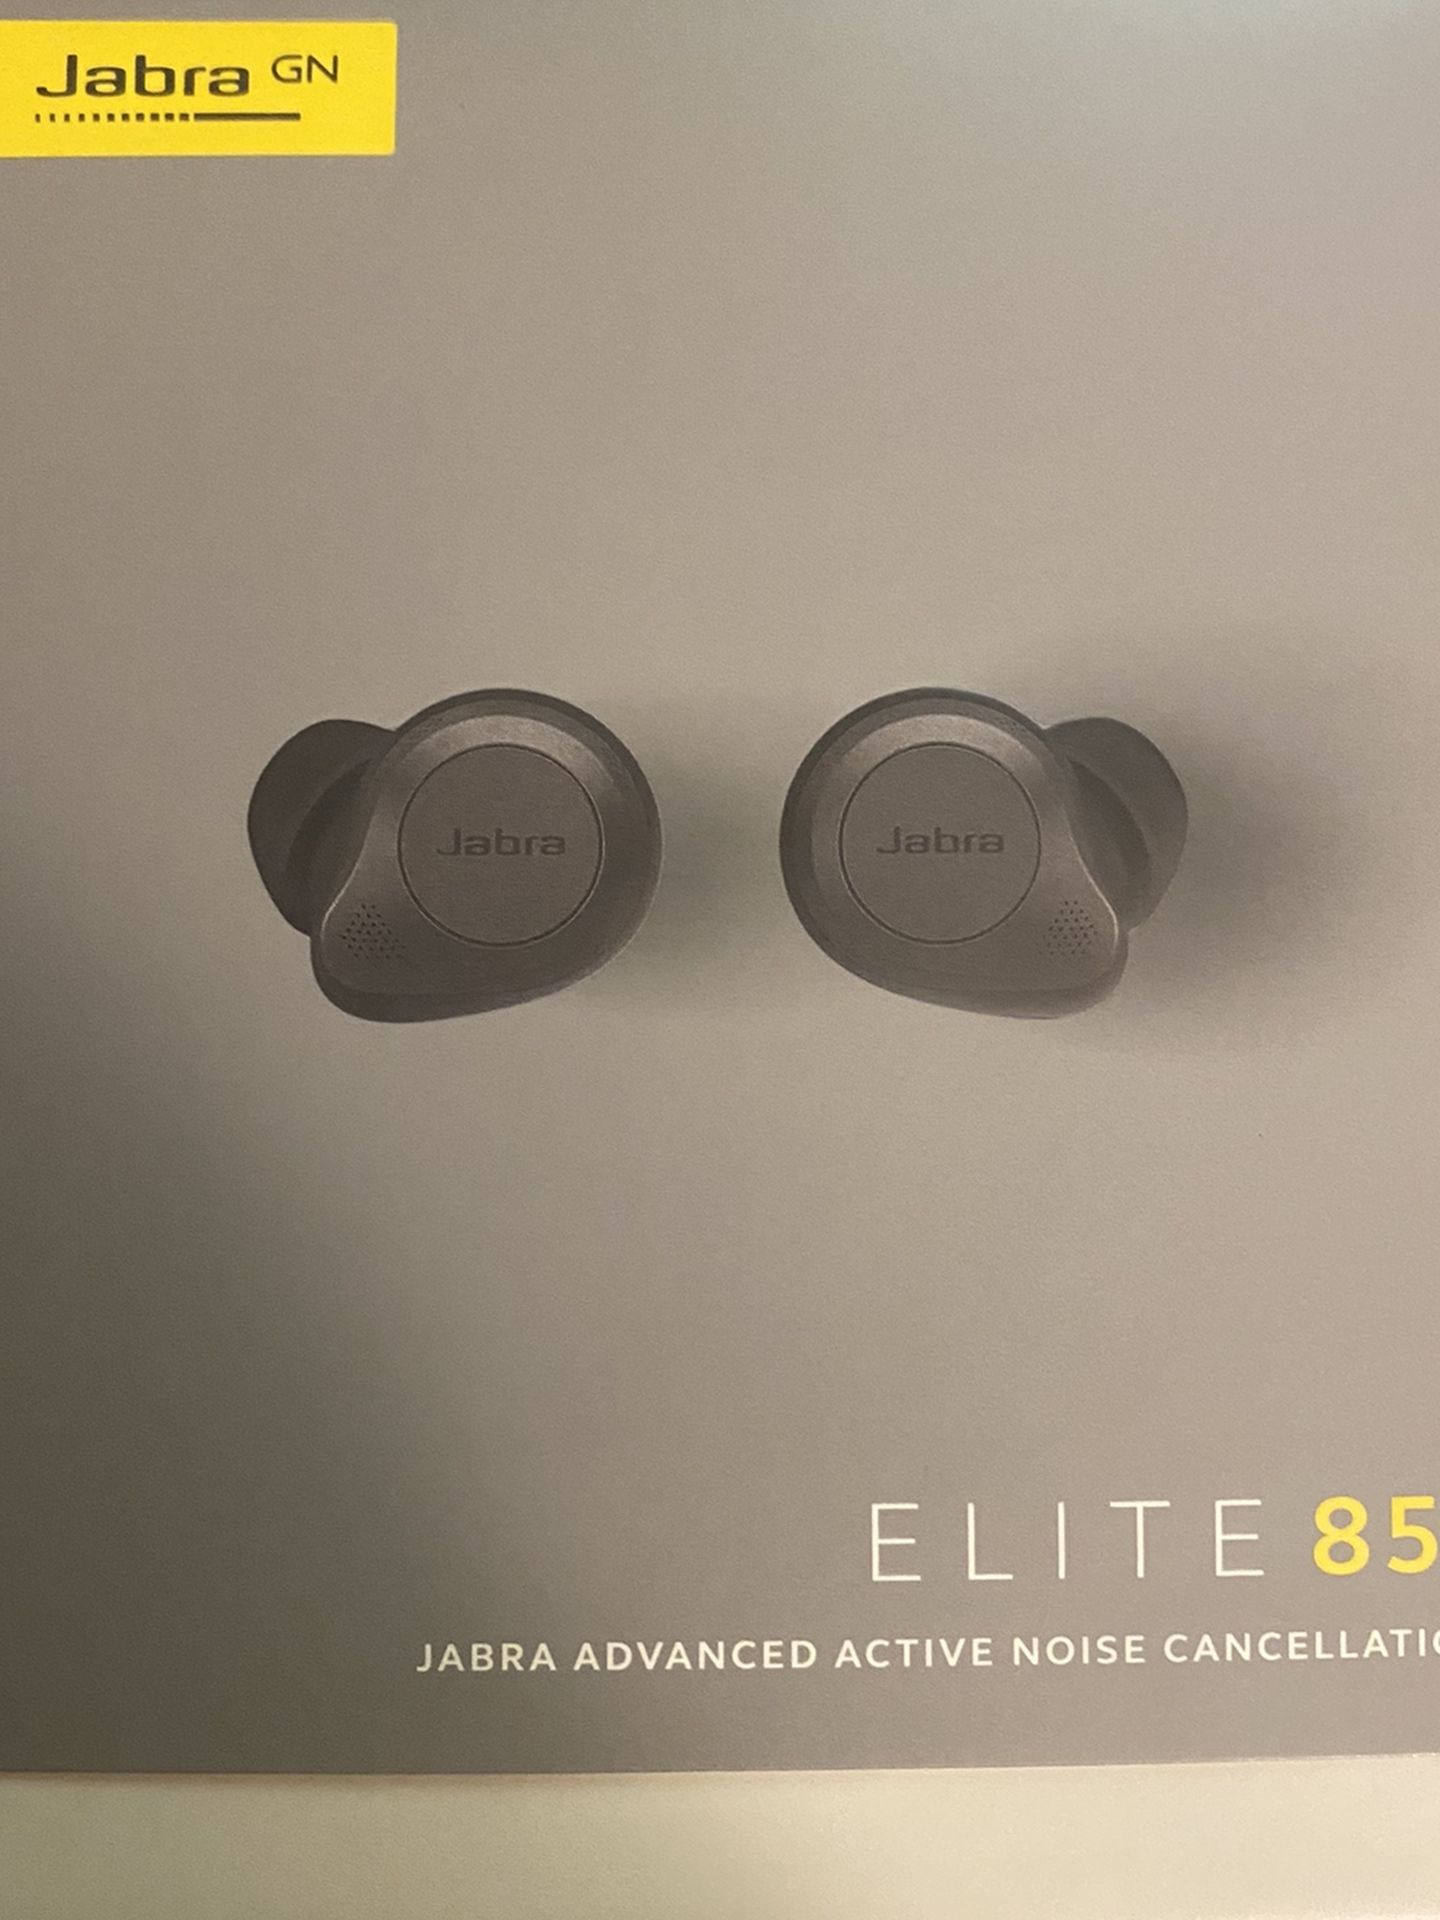 Jabra Elite 85t True Wireless Bluetooth Earbuds, Titanium Black – Advanced Noise-Cancelling Earbuds with Charging Case for Calls & Music – Wireless Ea